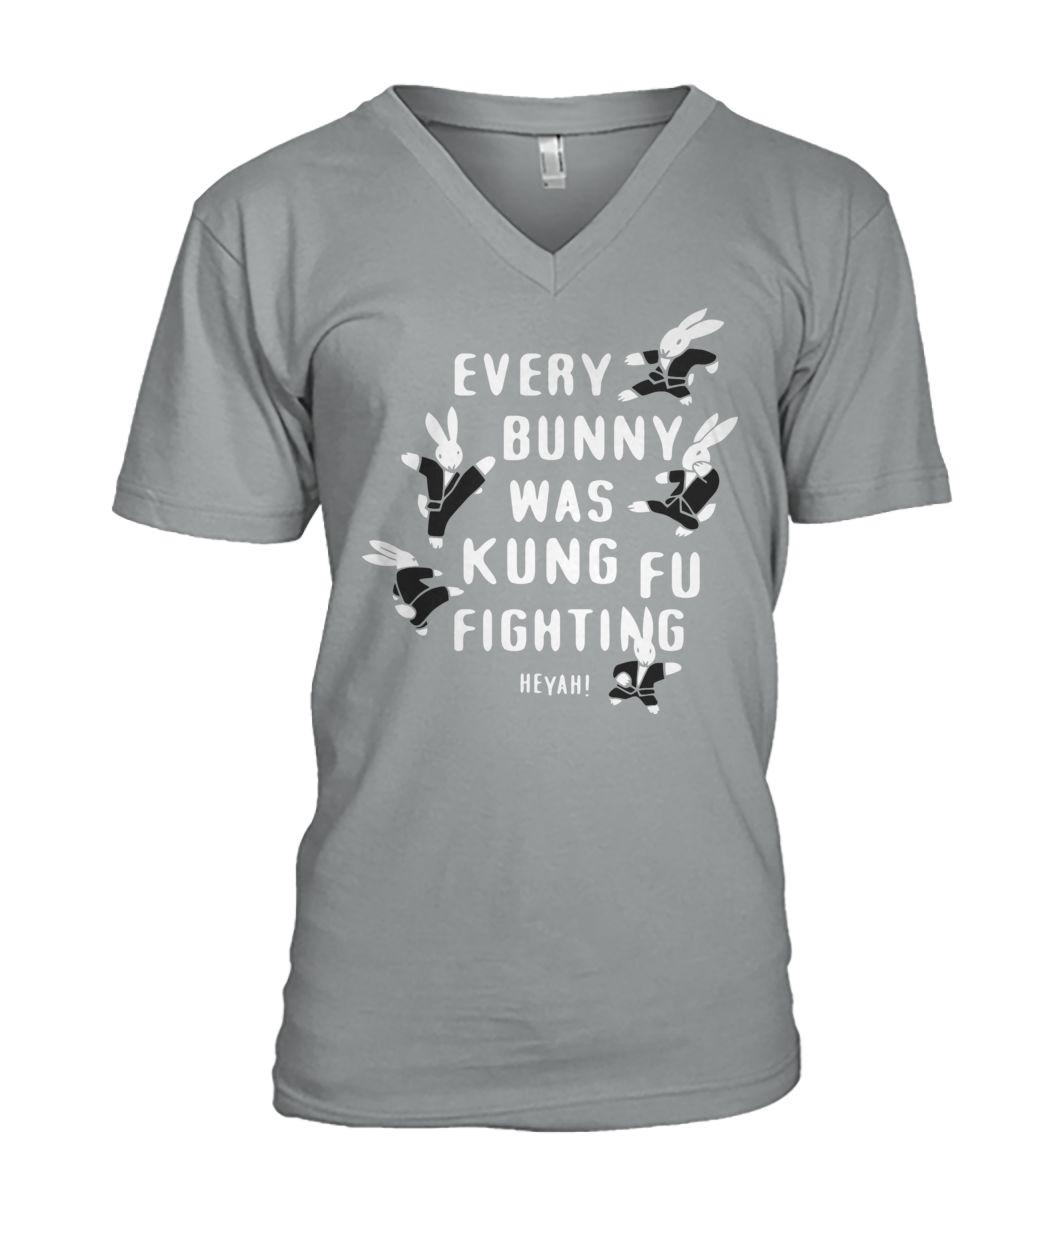 Every bunny was kung fu fighting easter mens v-neck